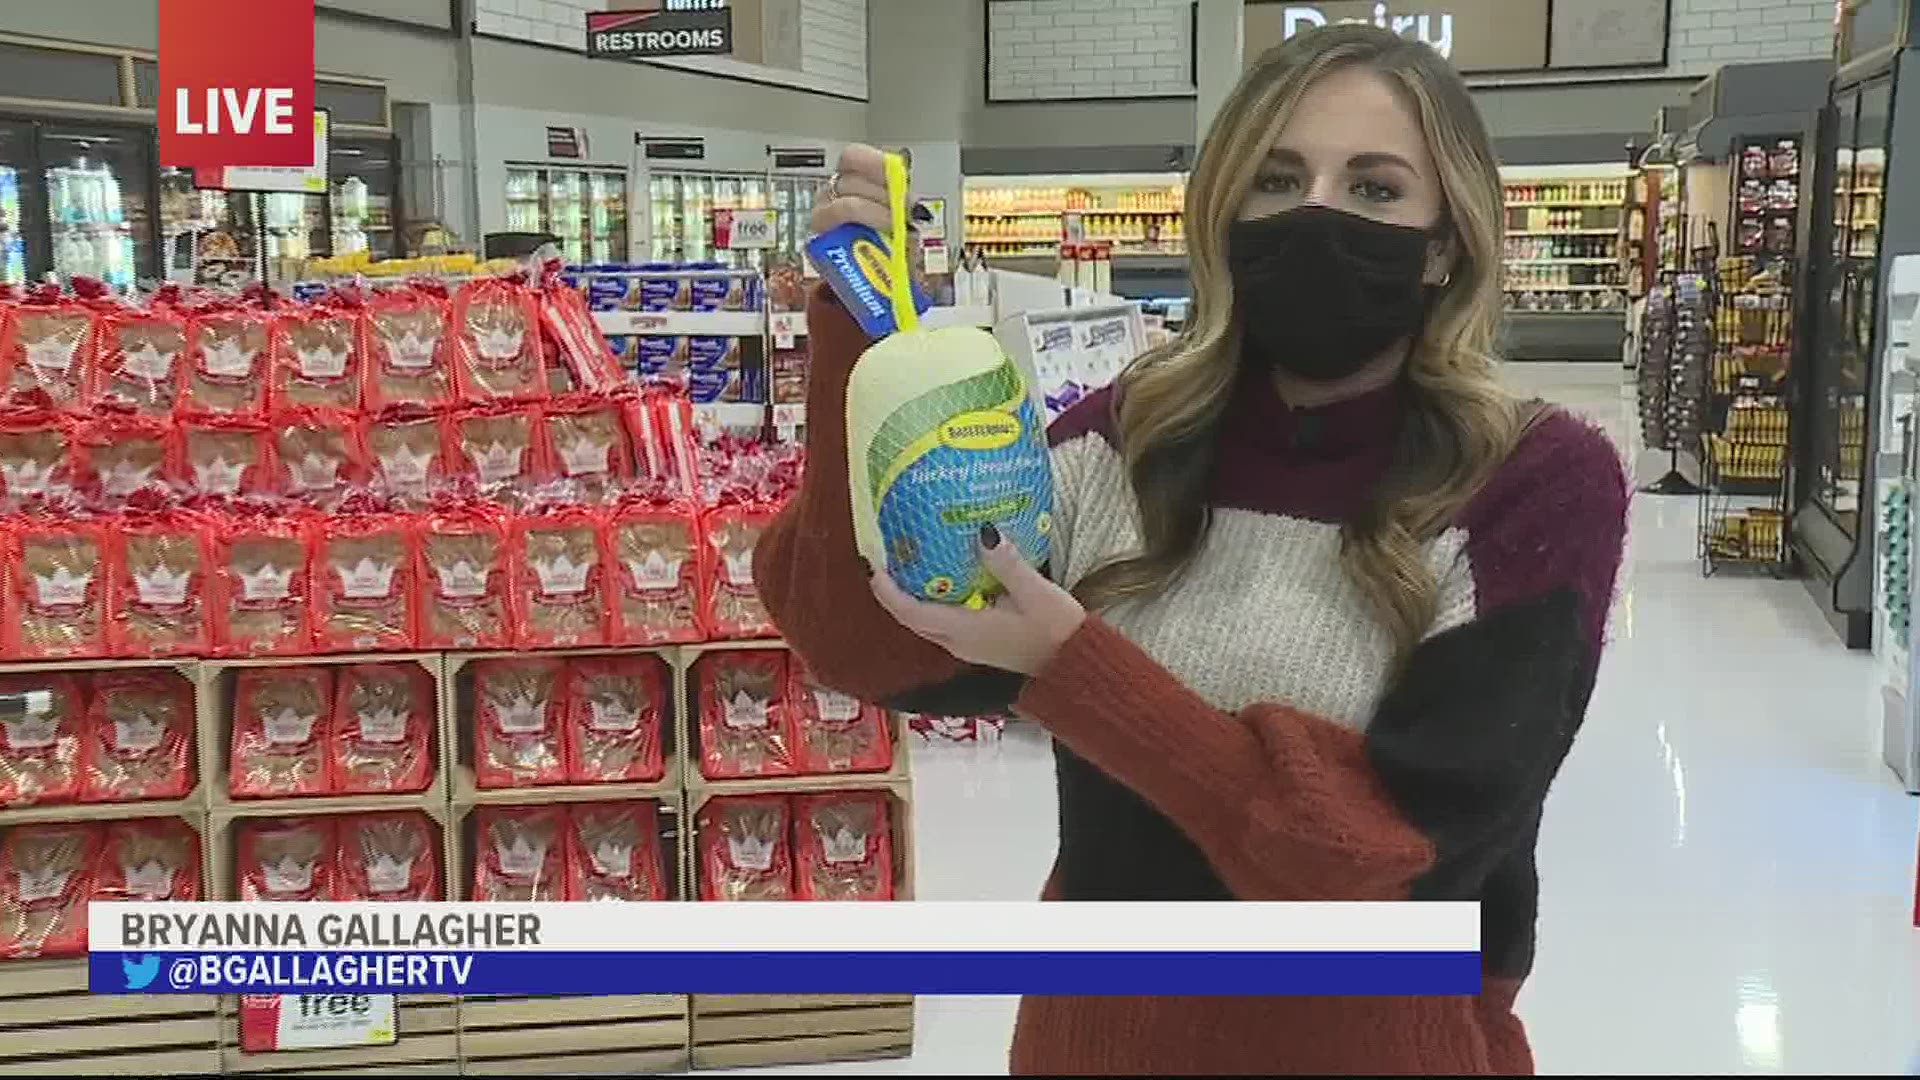 Families may be celebrating turkey day a little different this year amid the COVID-19 pandemic.